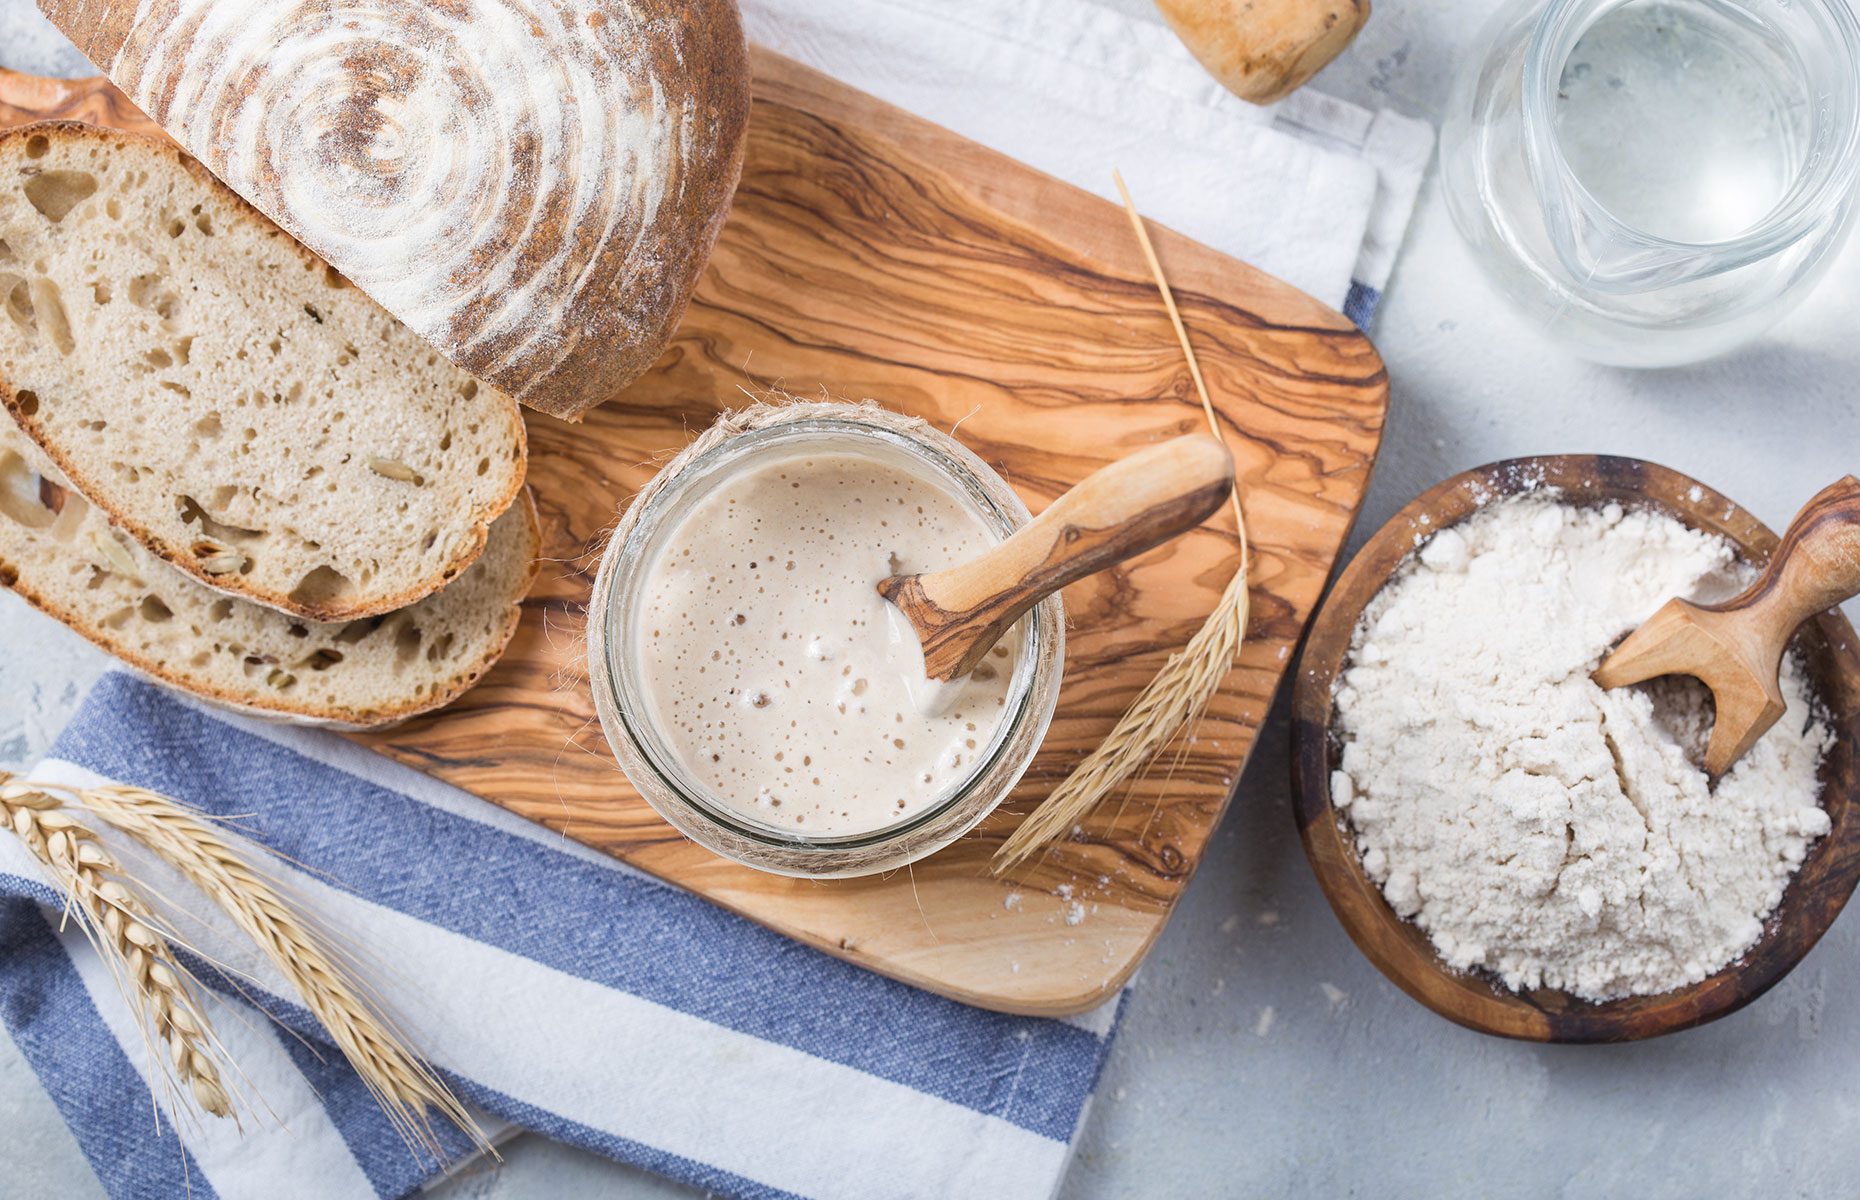 Sourdough starter with flour and a loaf (Image: Sokor Space/Shutterstock)